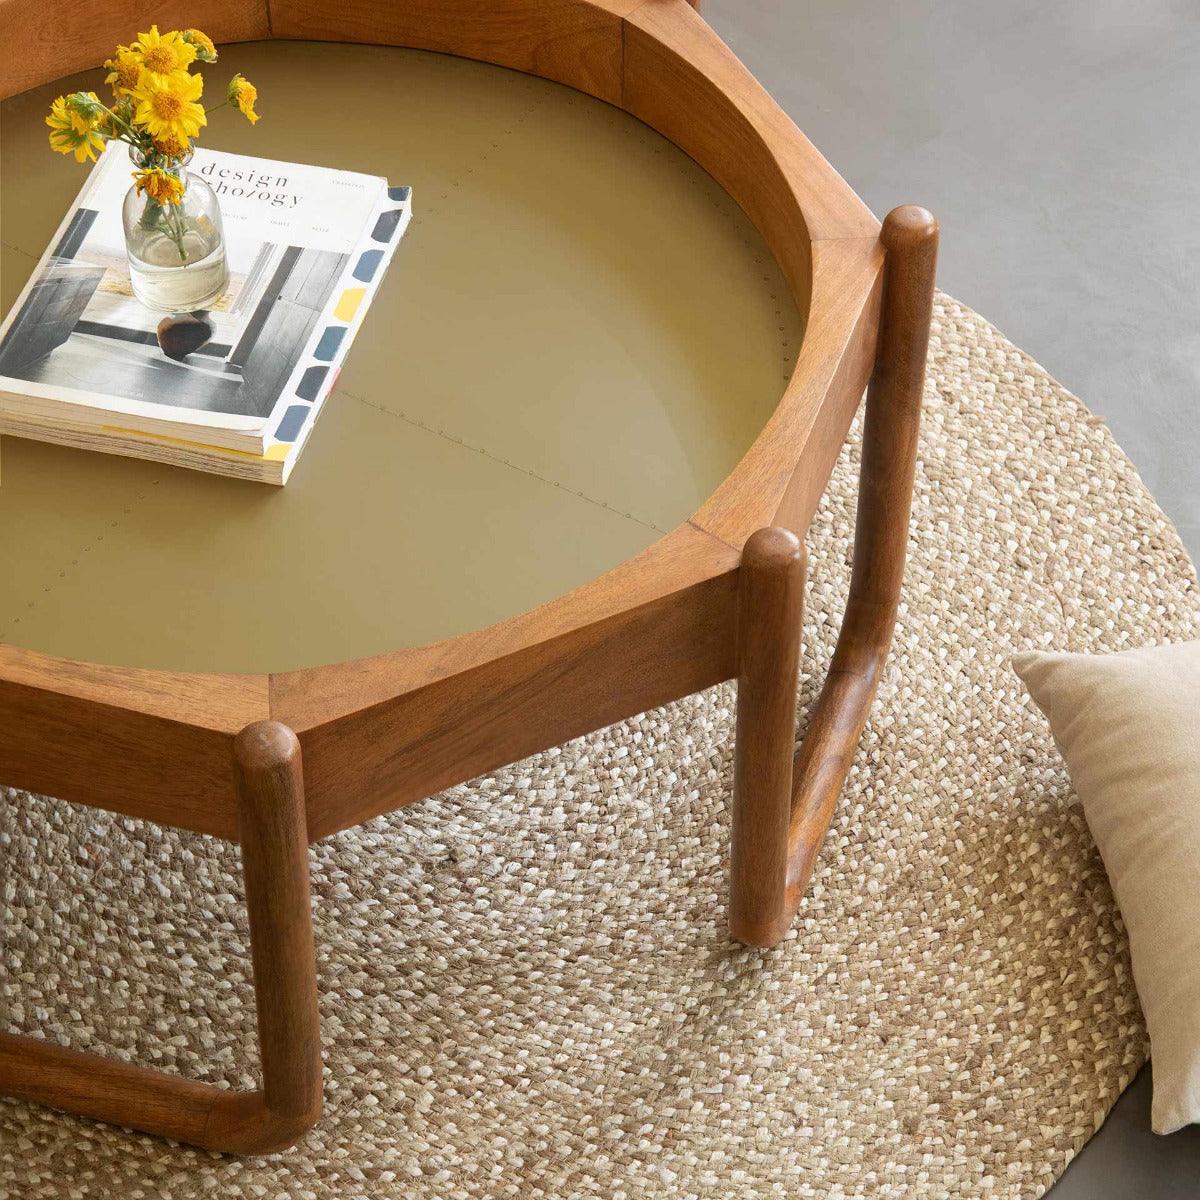 Bruno Octagon Coffee Table With Wooden Legs